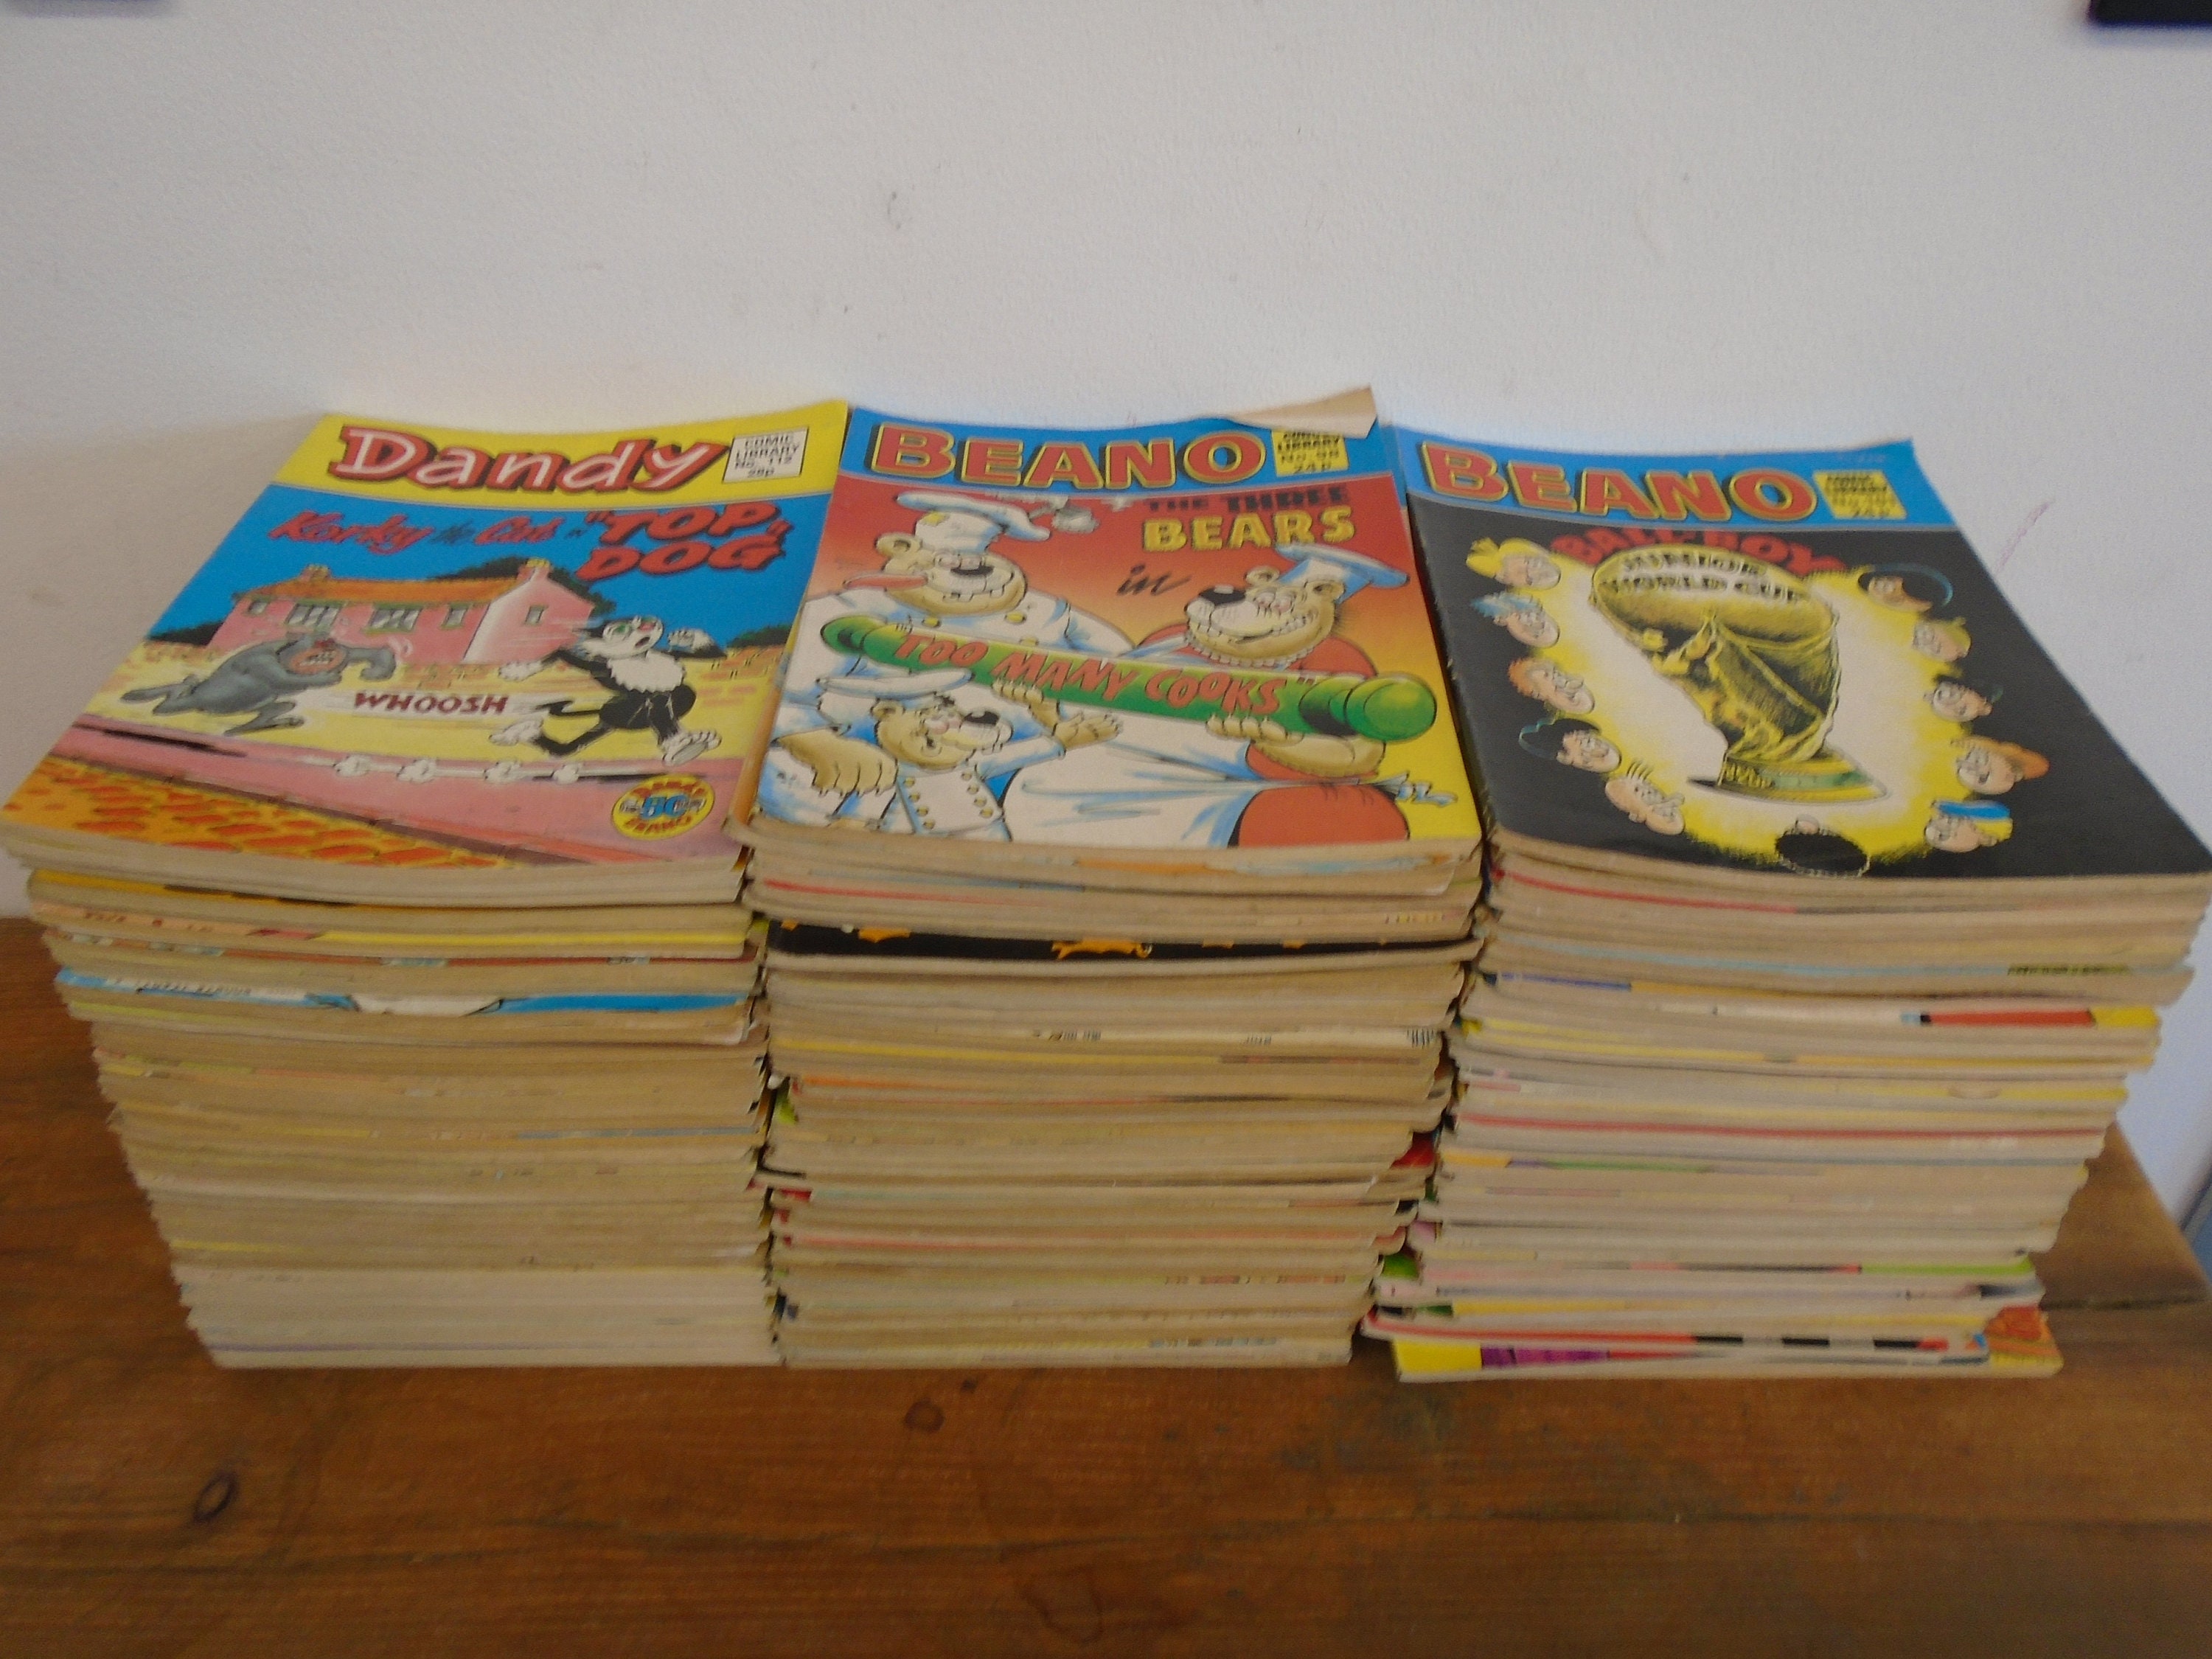 Comic Bags and Boards for Vintage Comics. Crystal Clear Acid-free